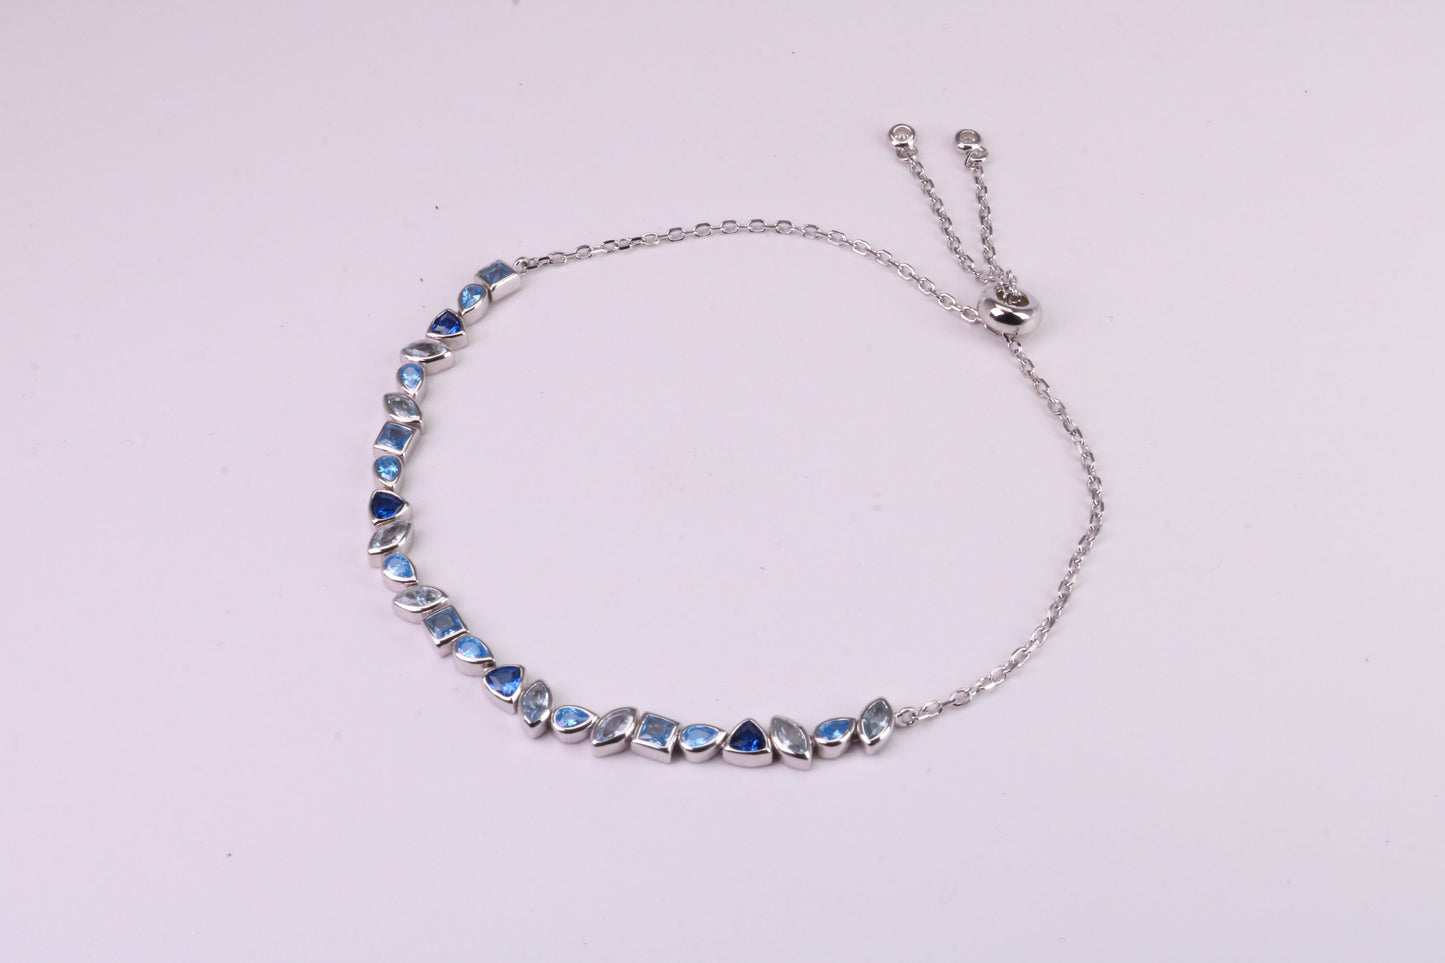 Blue Sapphire, Aquamarine and Topaz C Z Set Bracelet, Length Adjustable Chain, Made from solid Sterling Silver